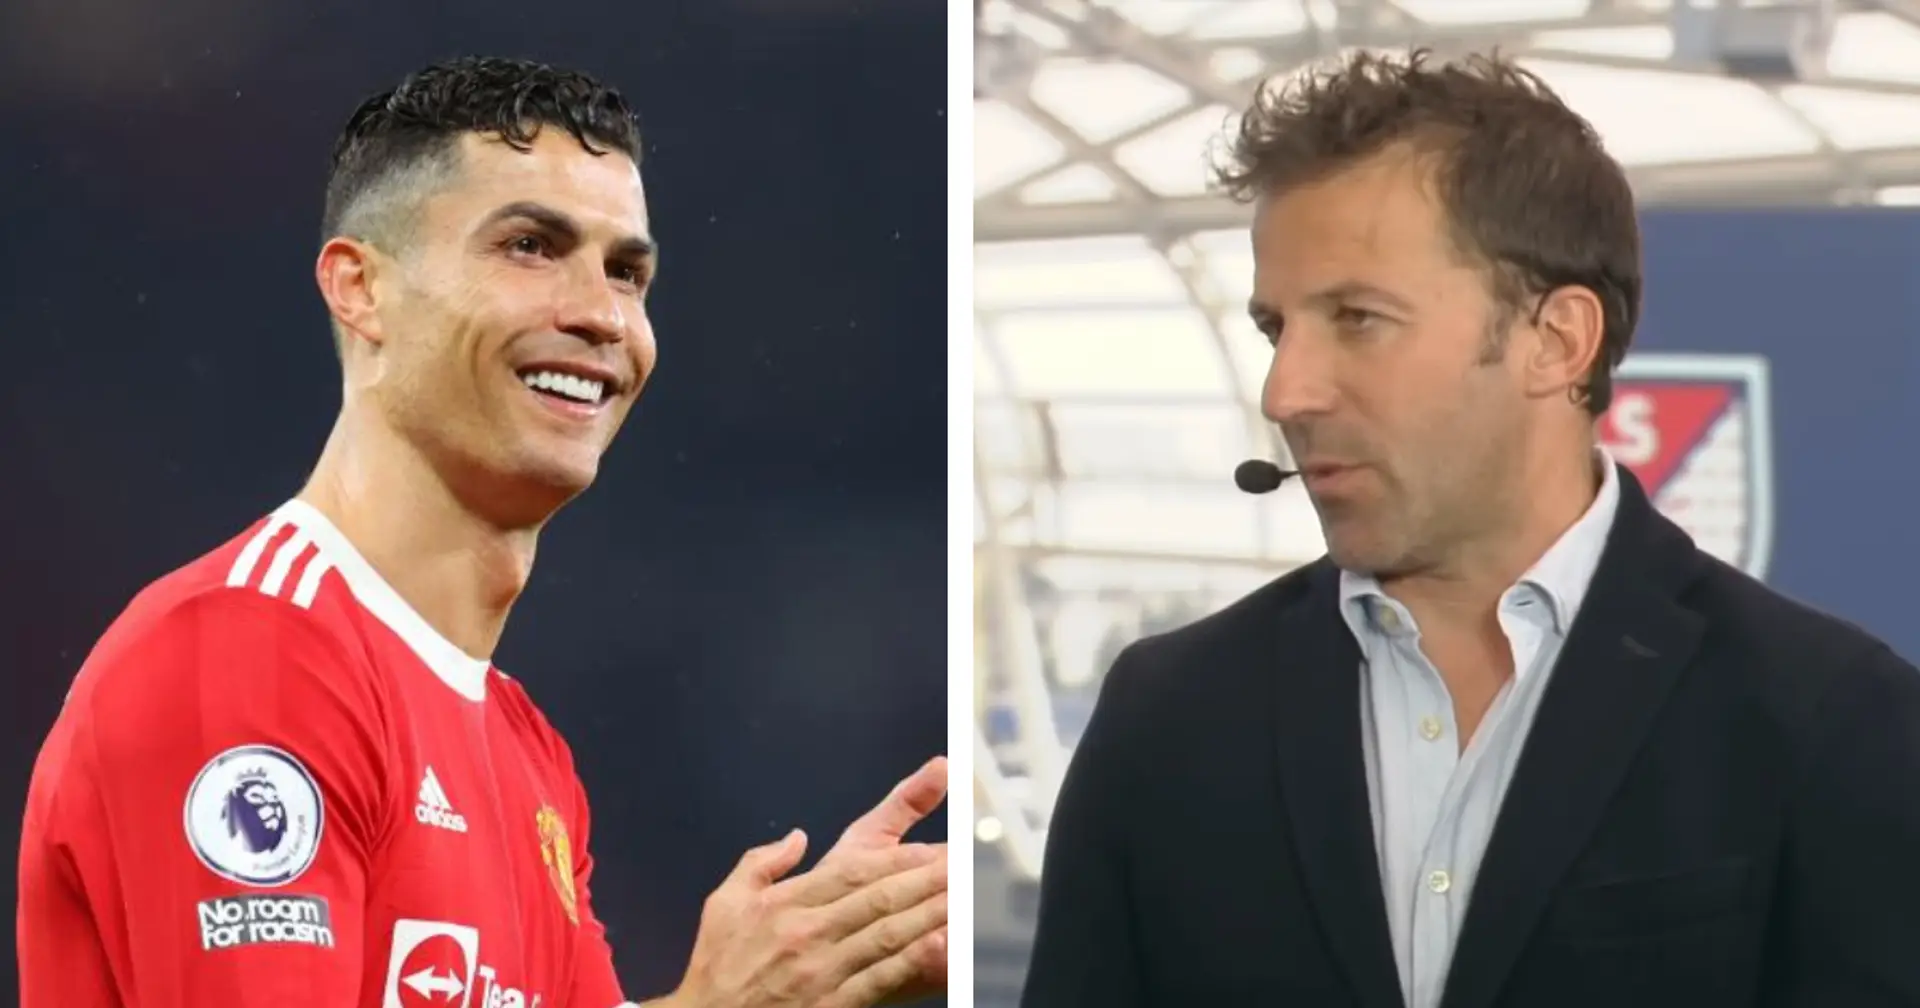 'He's an amazing champion, great mentality': Alessandro Del Piero backs Ronaldo to find new club